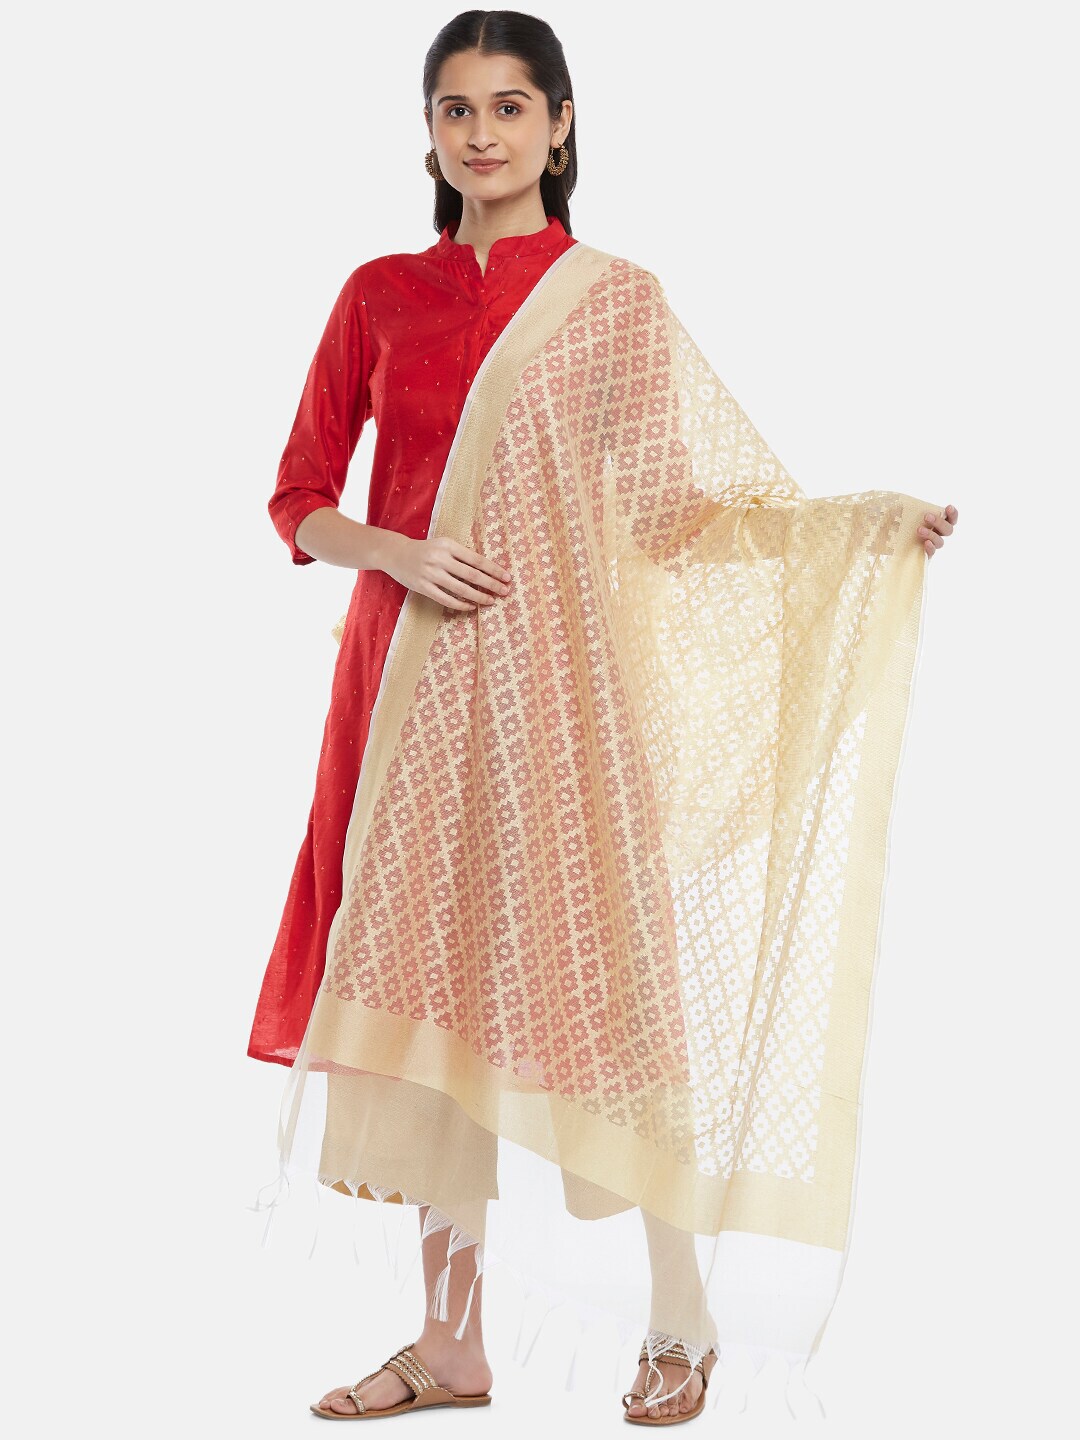 RANGMANCH BY PANTALOONS Gold-Toned Woven Design Dupatta Price in India